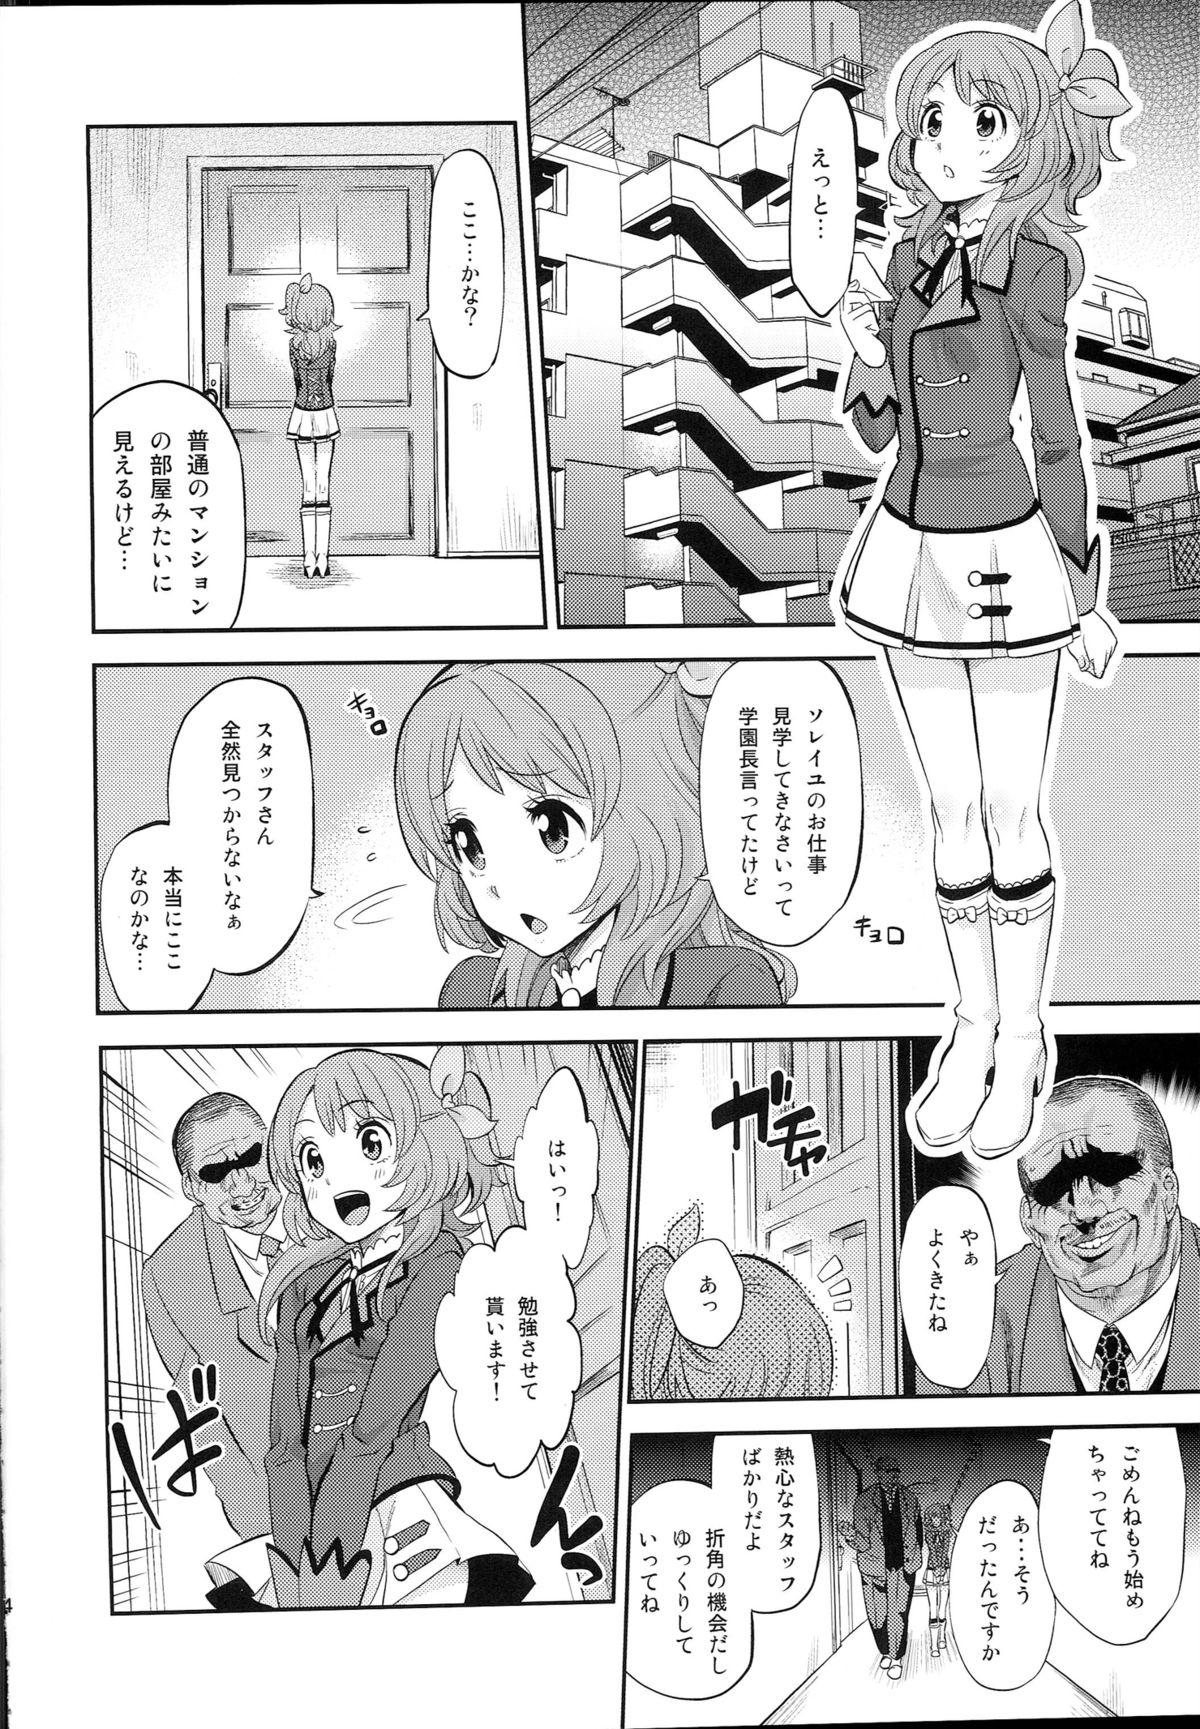 Butt Fuck IT WAS A good EXPERiENCE - Aikatsu Tanned - Page 4